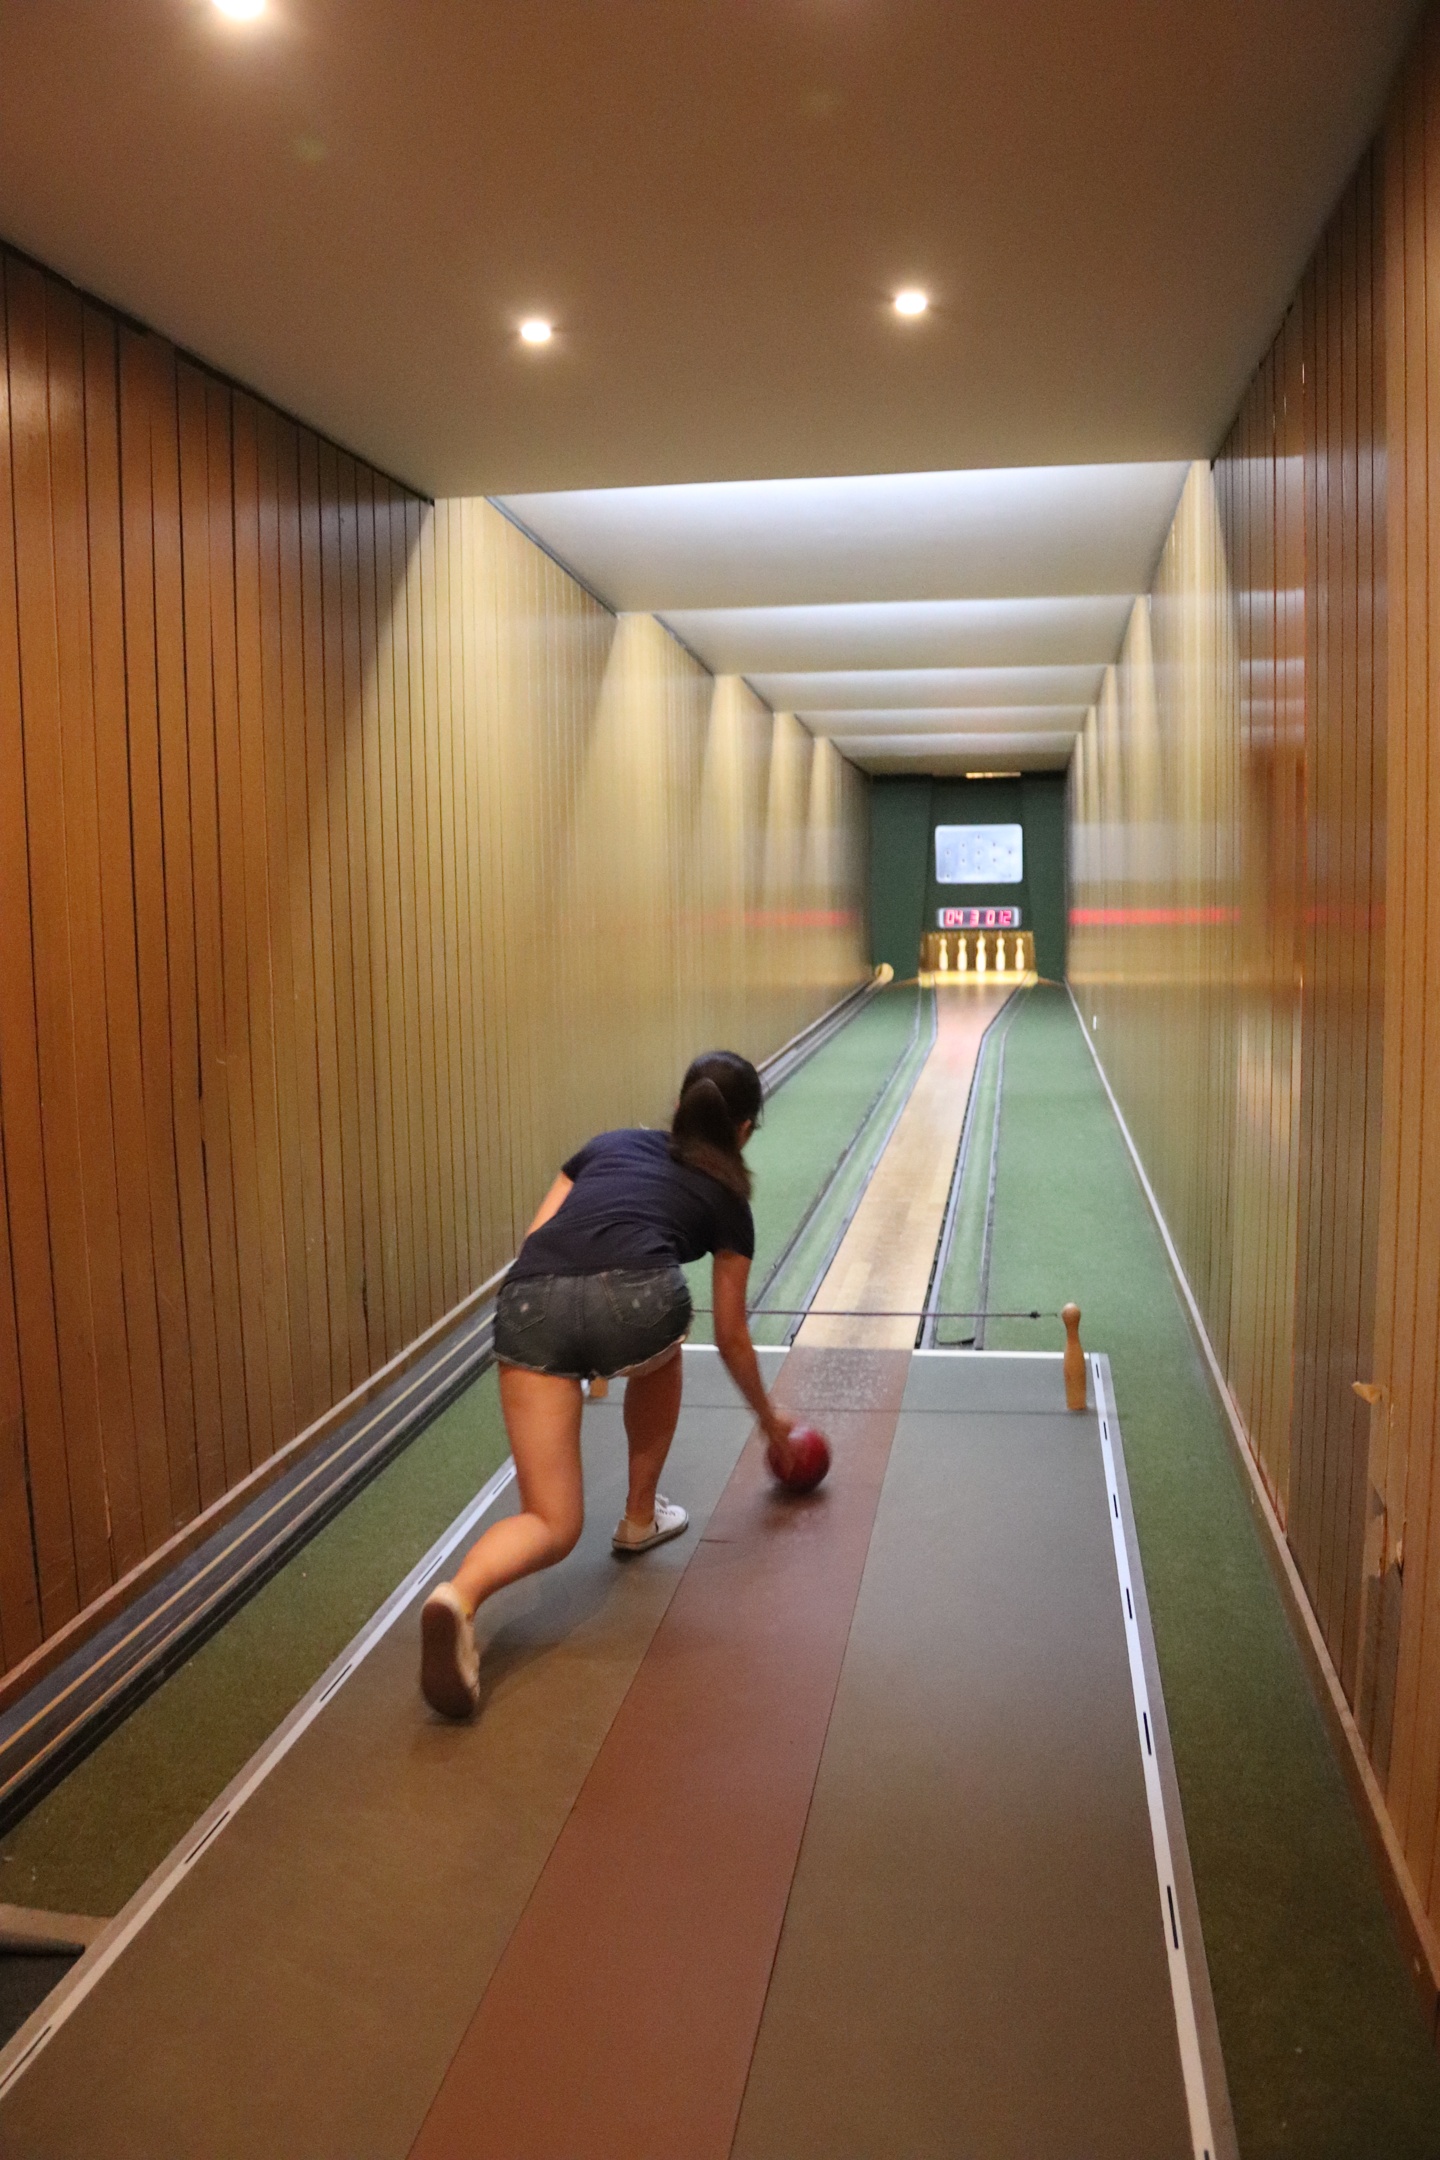 Backview of a student bowling